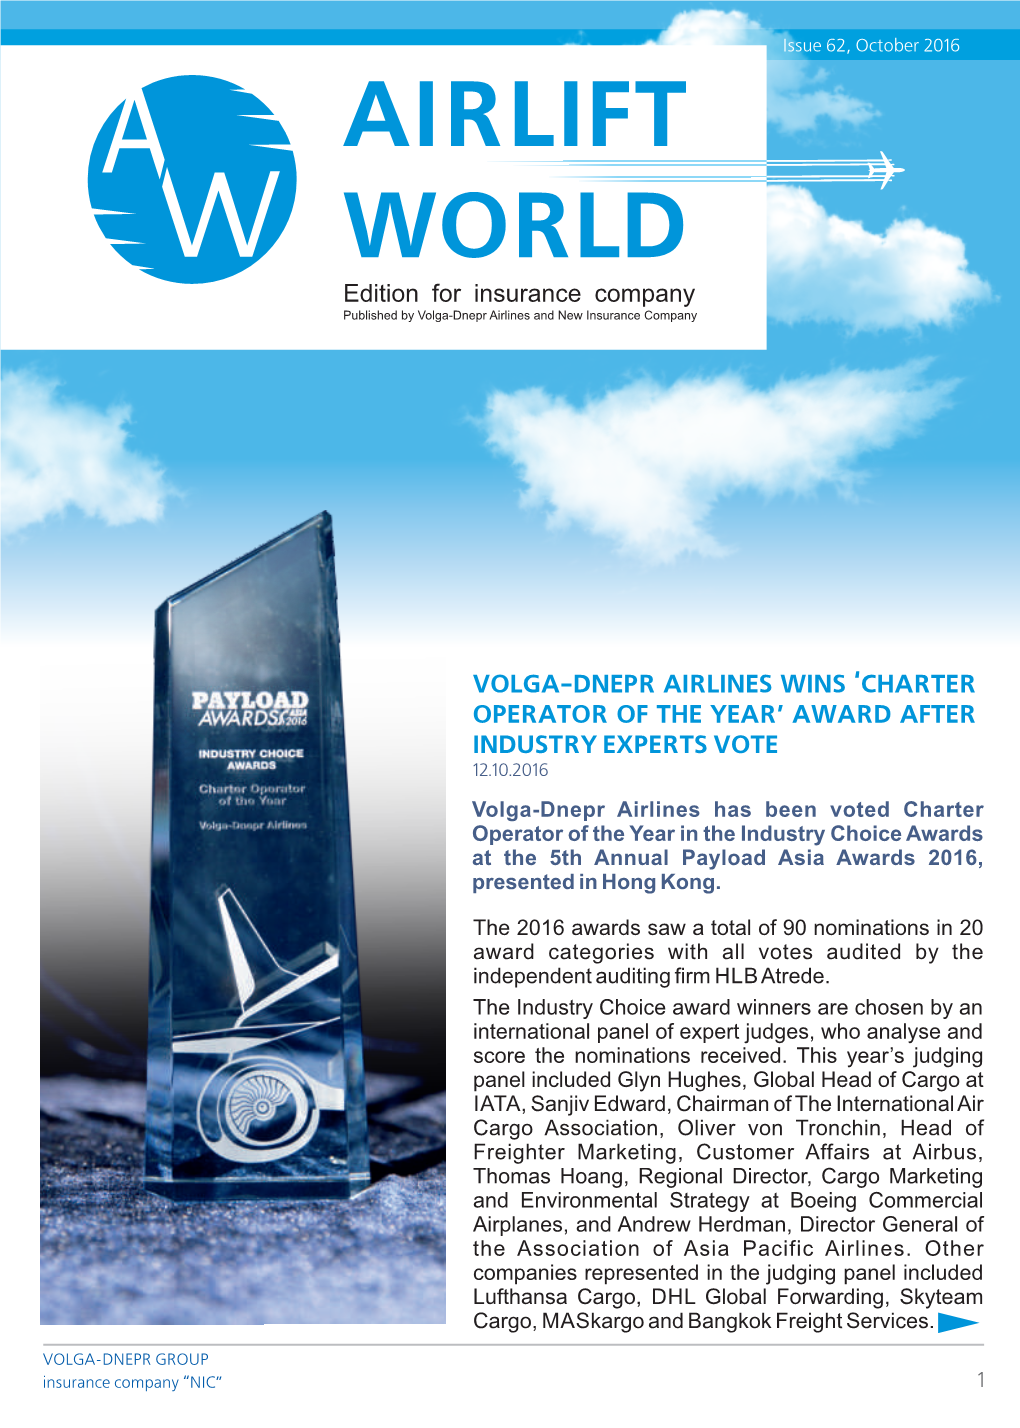 AIRLIFT WORLD Edition for Insurance Company Published by Volga-Dnepr Airlines and New Insurance Company